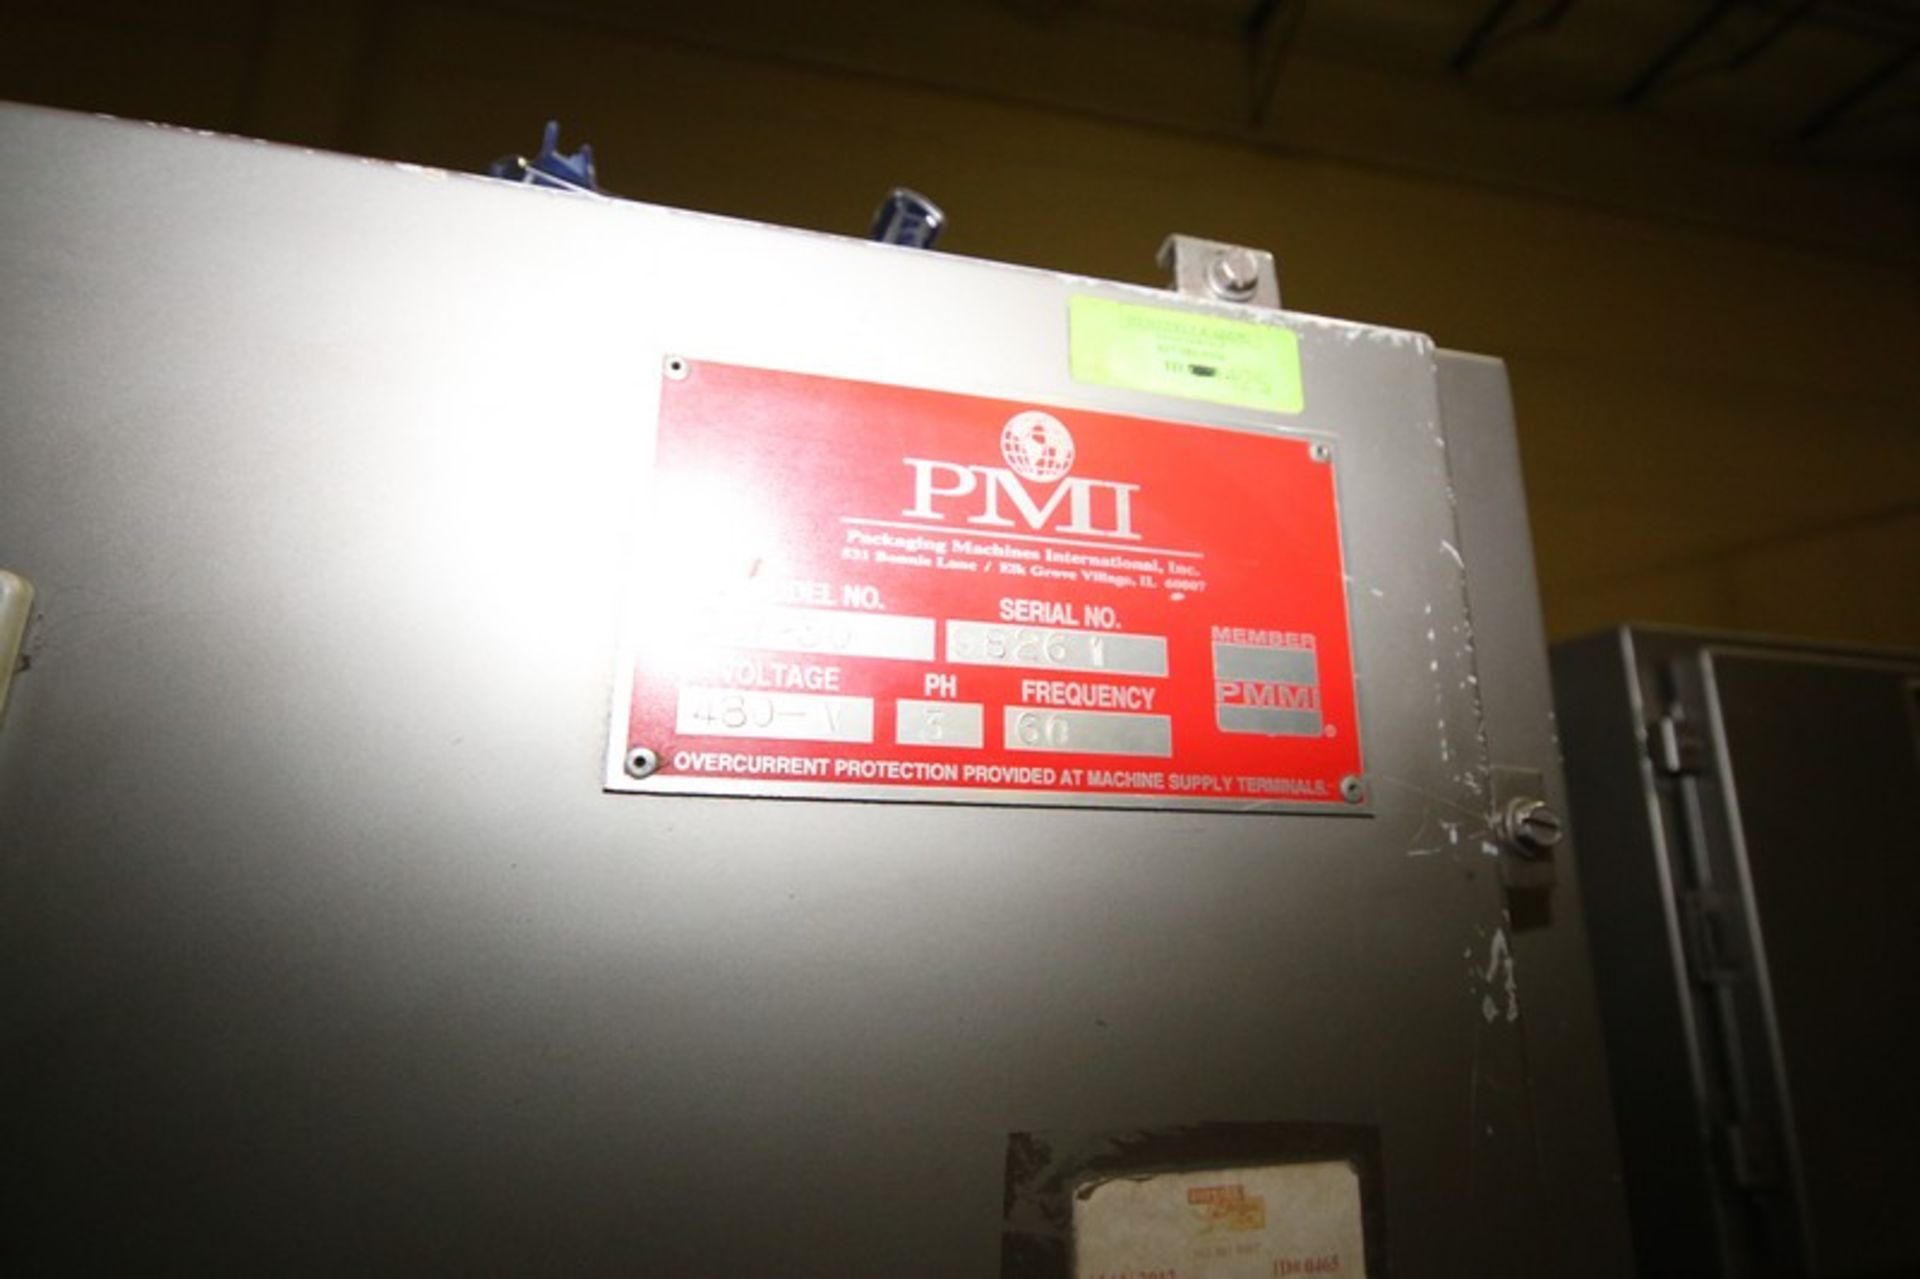 PMI Heat Tunnel, M/N CSI-30, S/N 98261, 480 Volts, 26" W Conveyor, with 30" W x 17" H Opening ( - Image 4 of 6